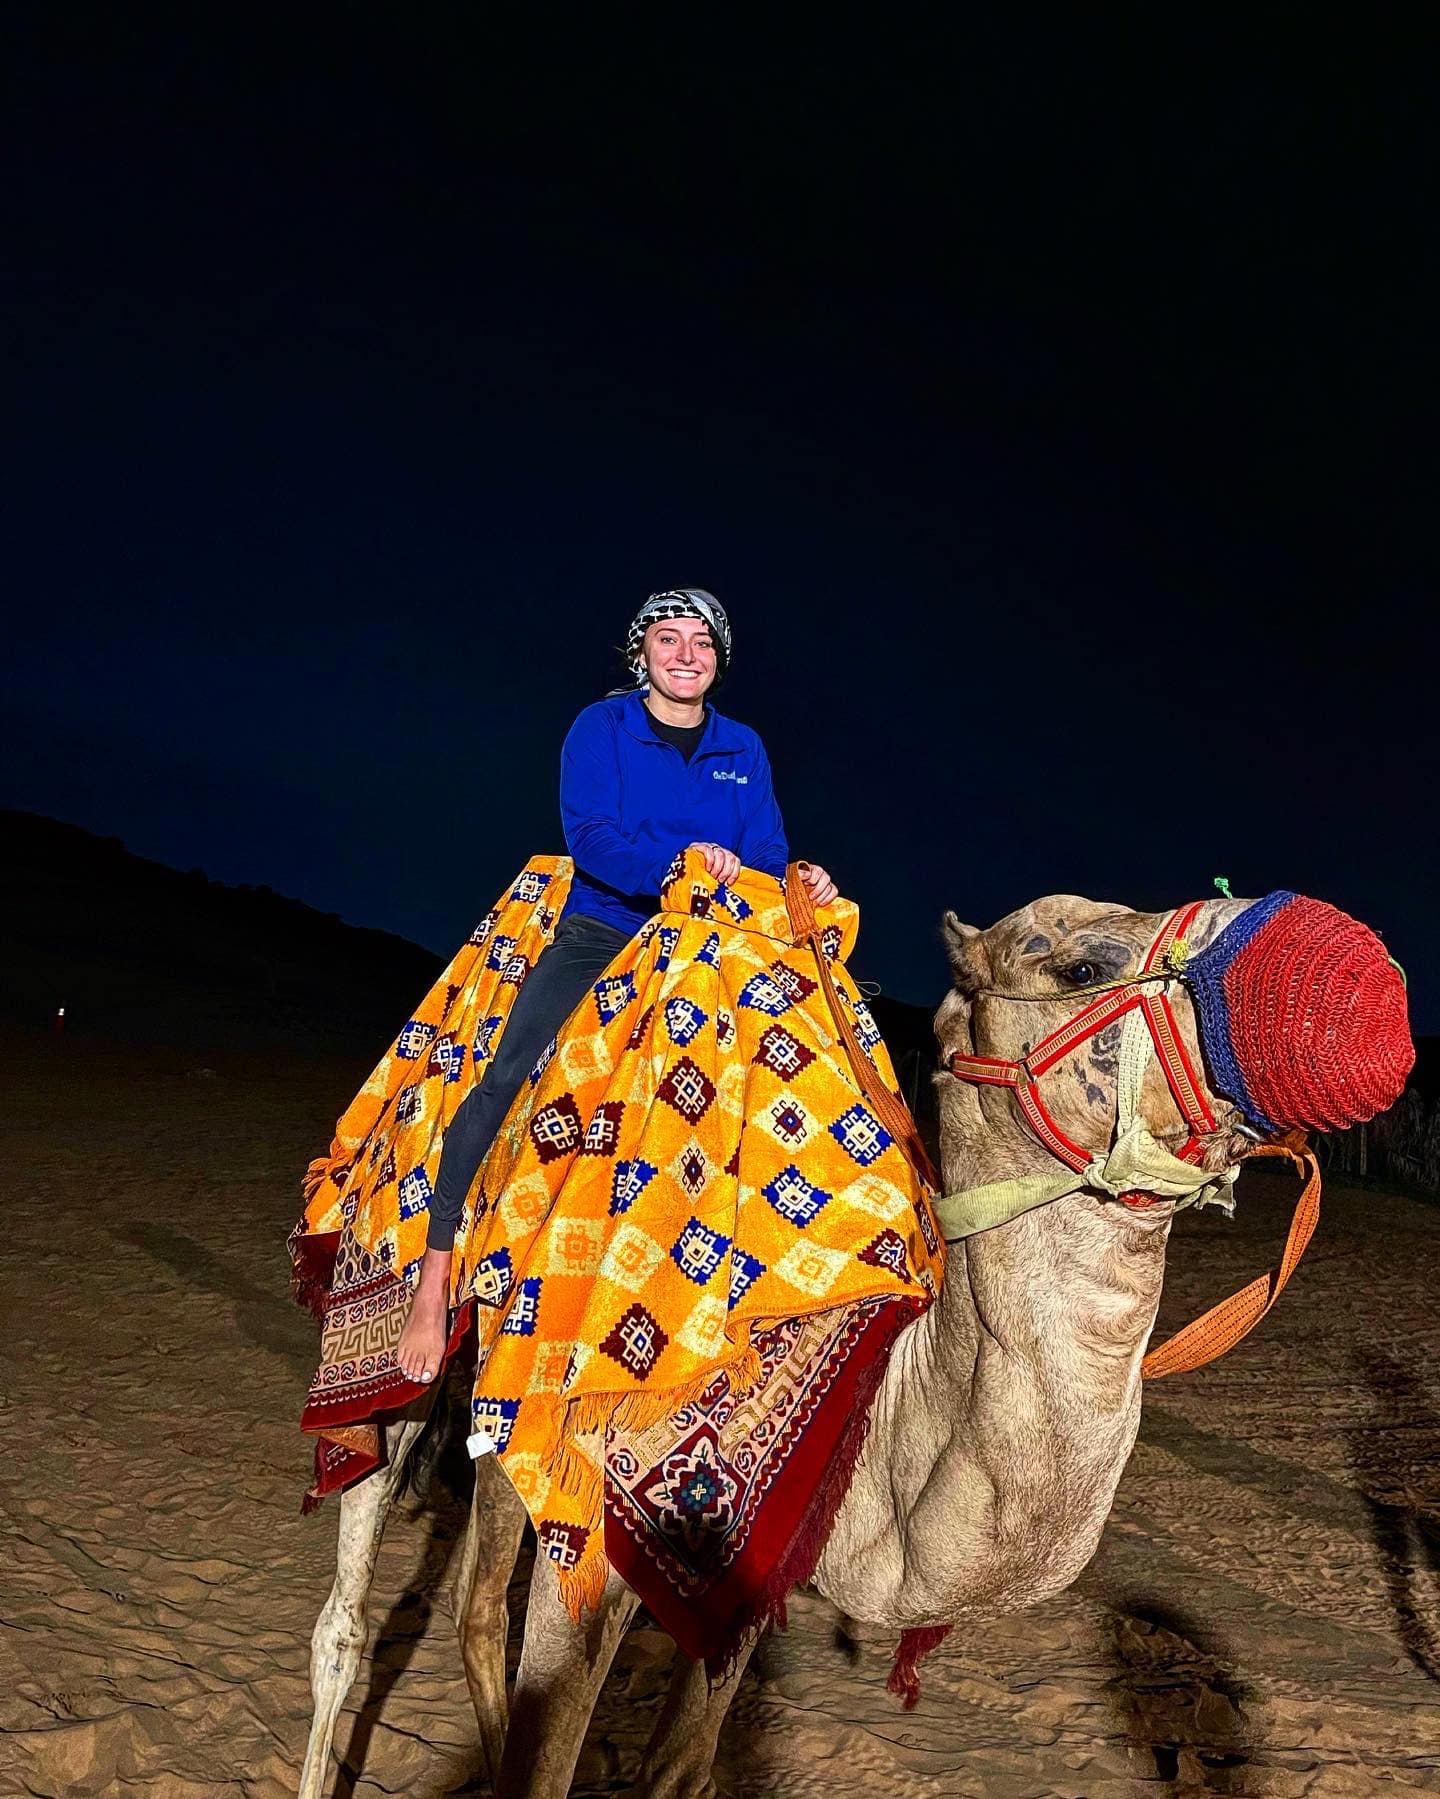 A person riding on a camel at night time. 